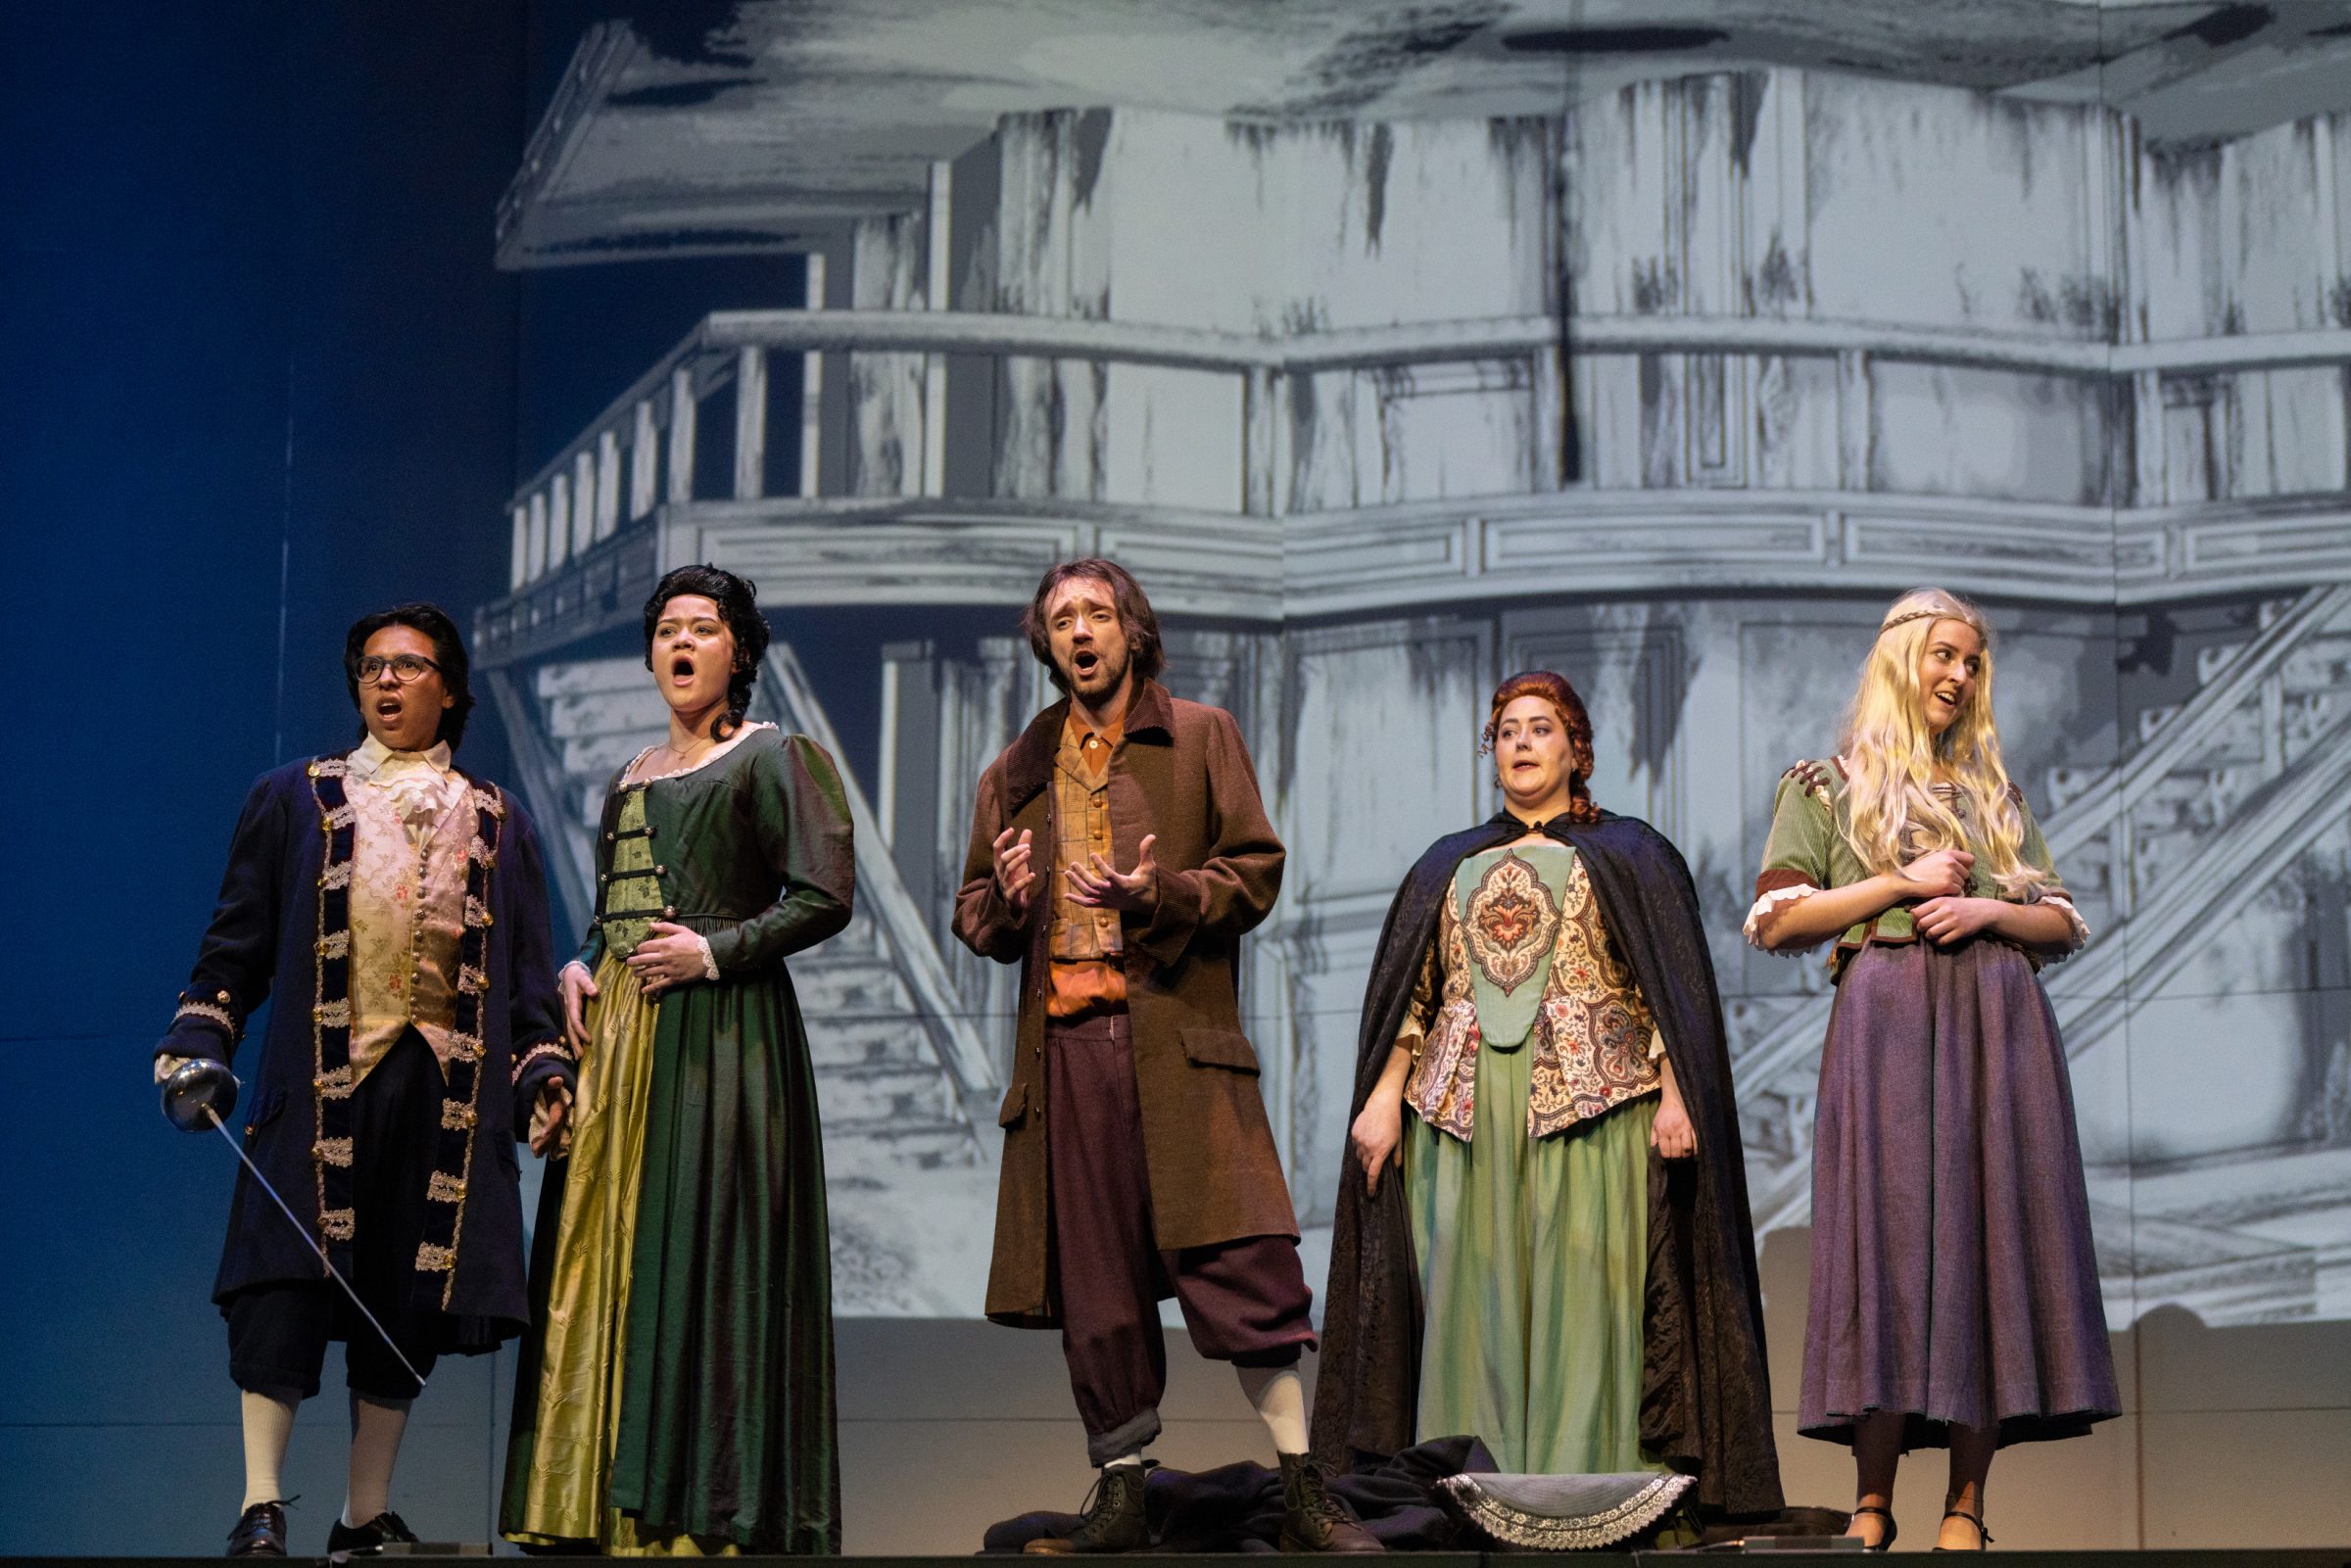 A group of opera performers dressed in character and singing on a stage.